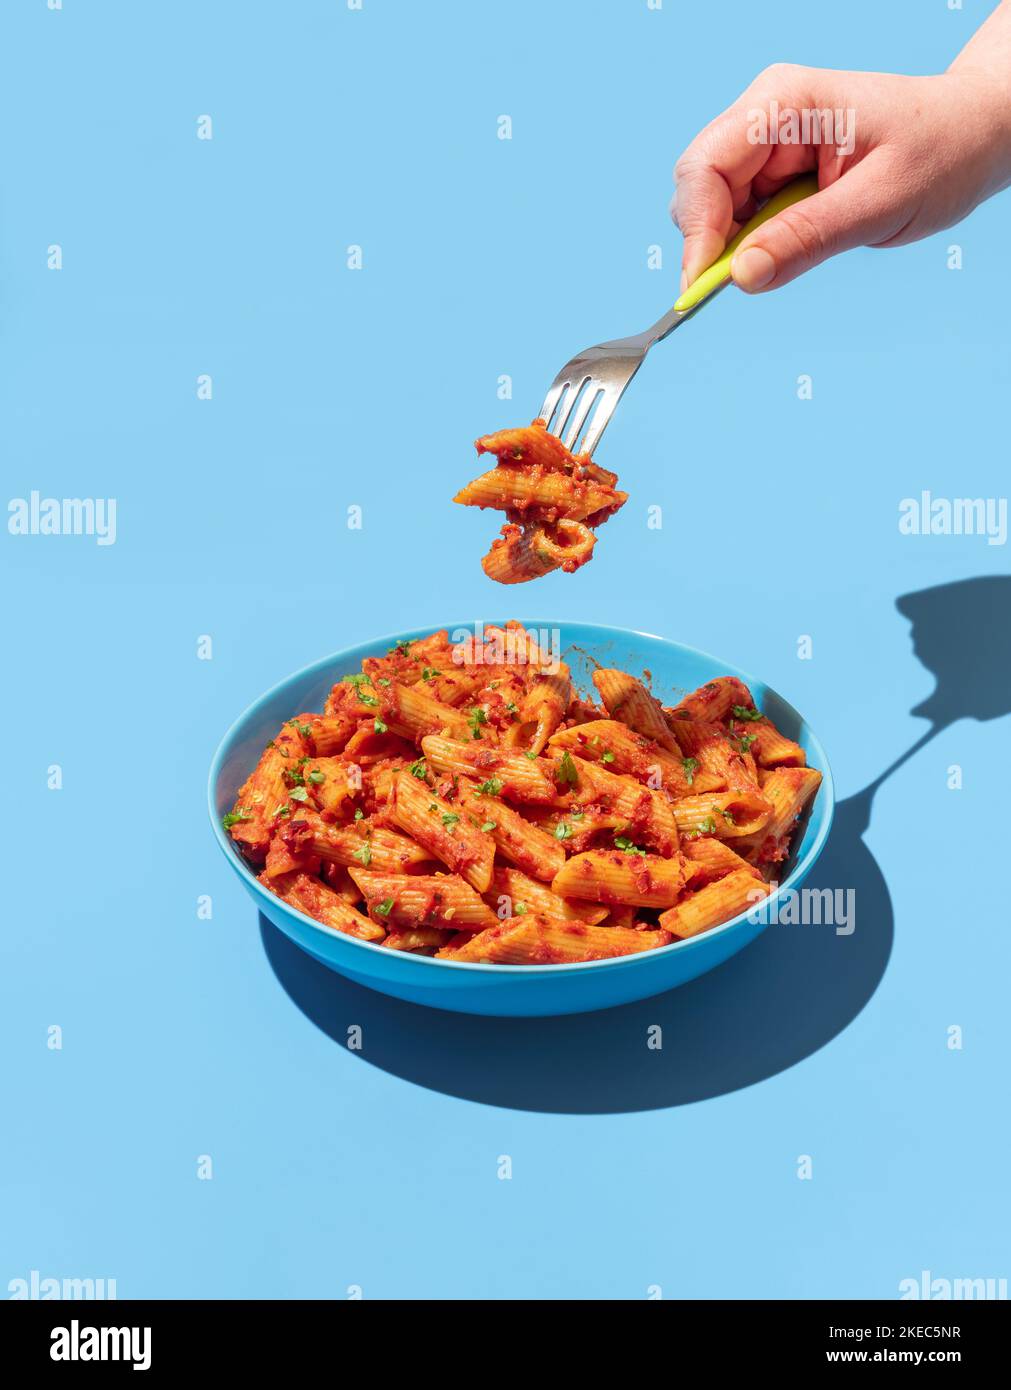 Woman's hand taking pasta with a fork from a blue bowl, minimalist on a blue table. Pasta alla arrabbiata in a blue bowl in bright light. Stock Photo